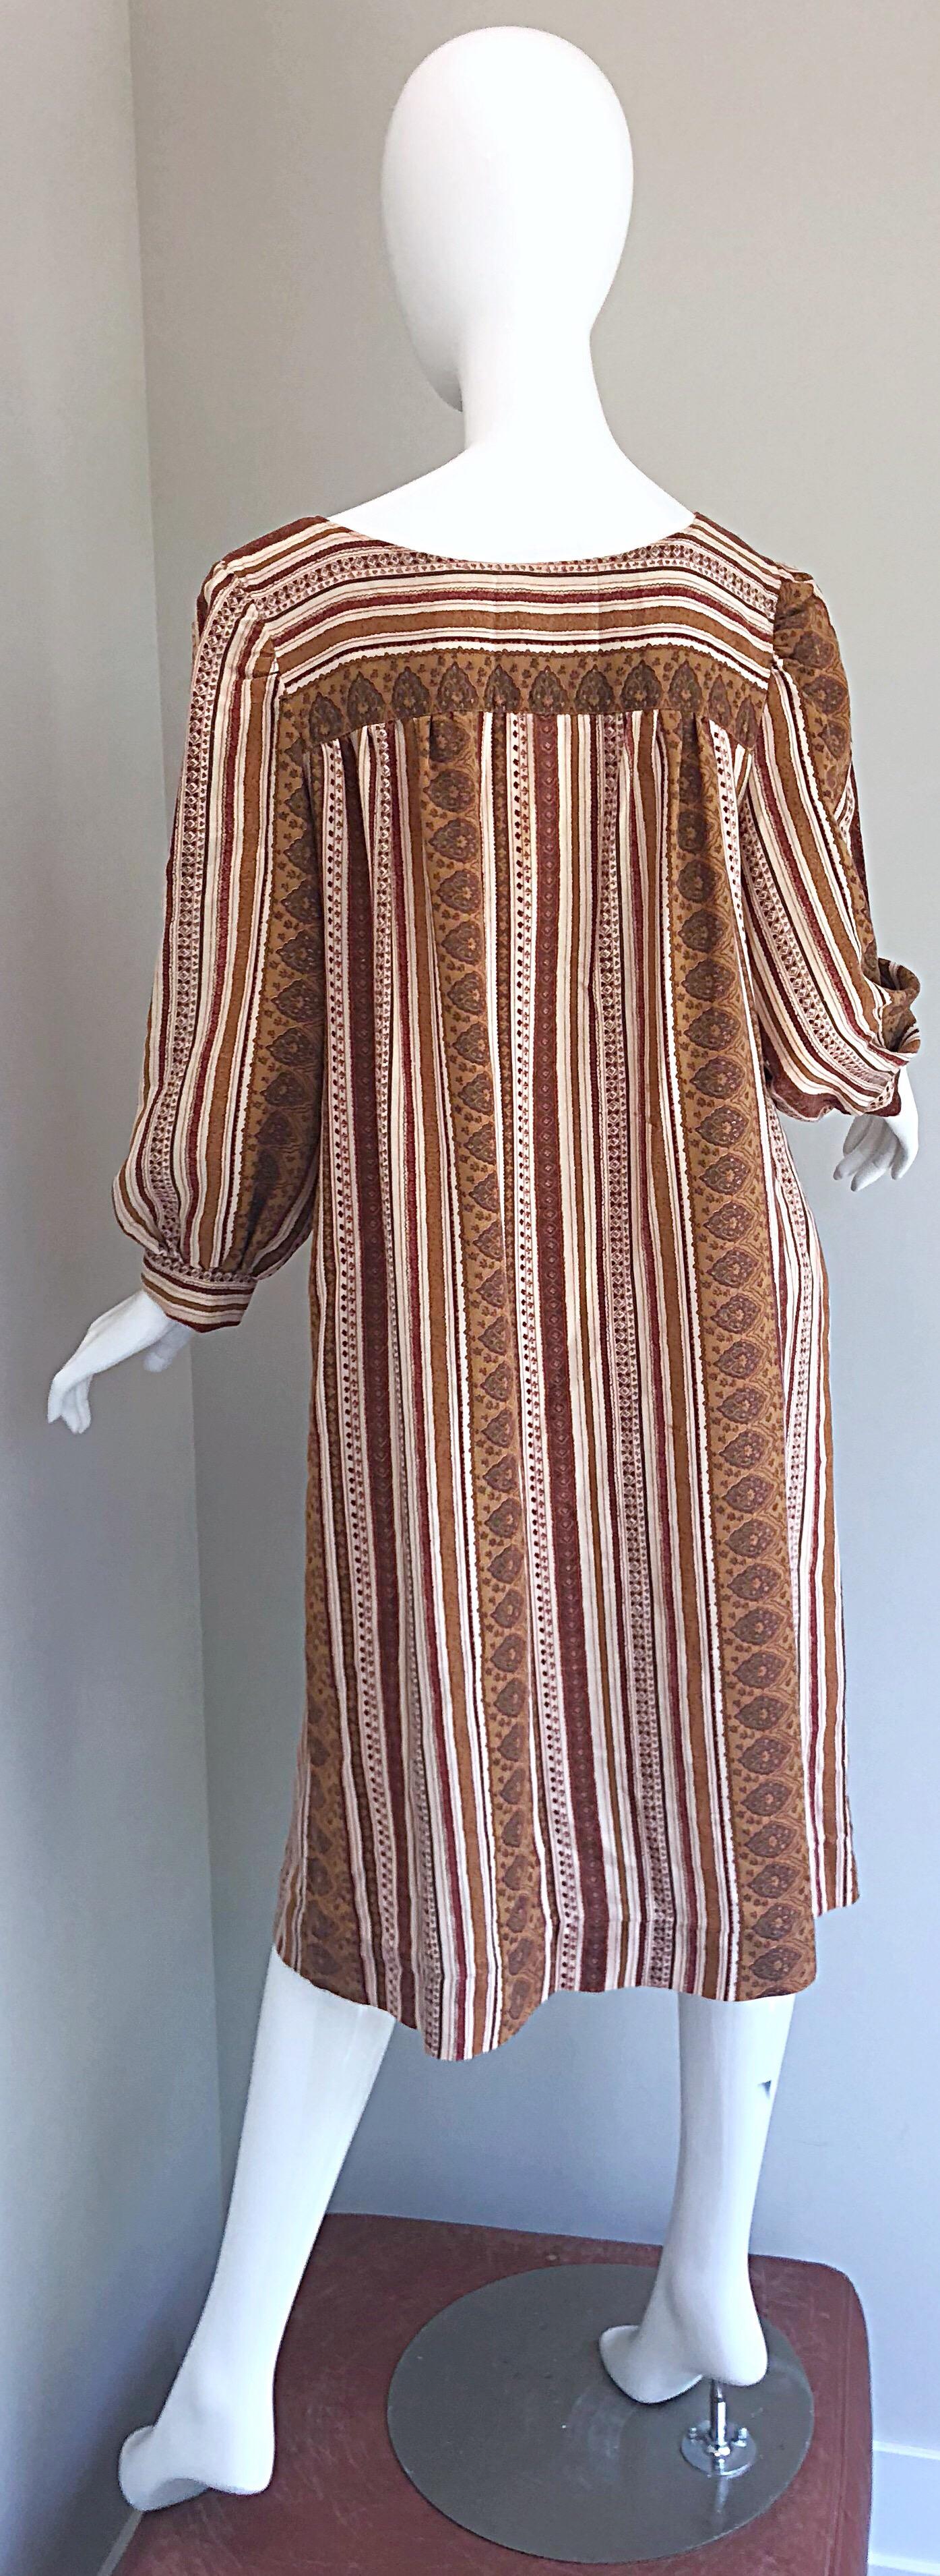 1970s Boho Chic Brown and Ivory Soft Cotton Paisley Print Vintage 70s Dress 6